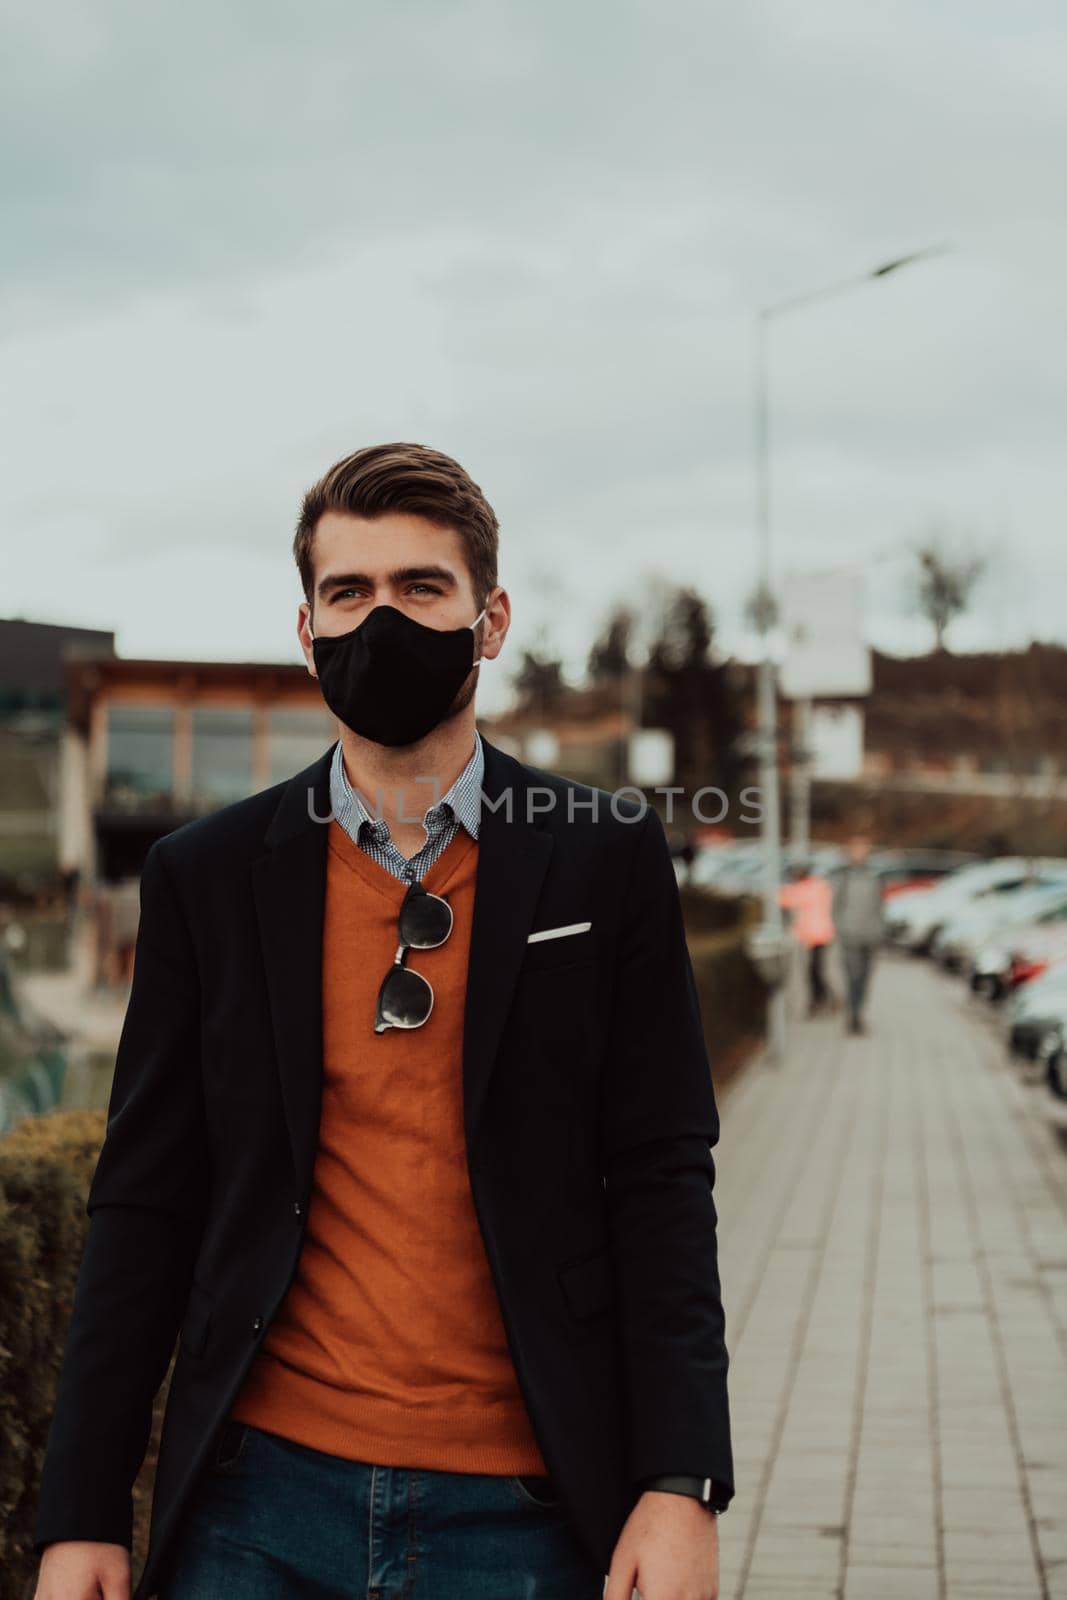  businessman wearing medical mask at the street by dotshock